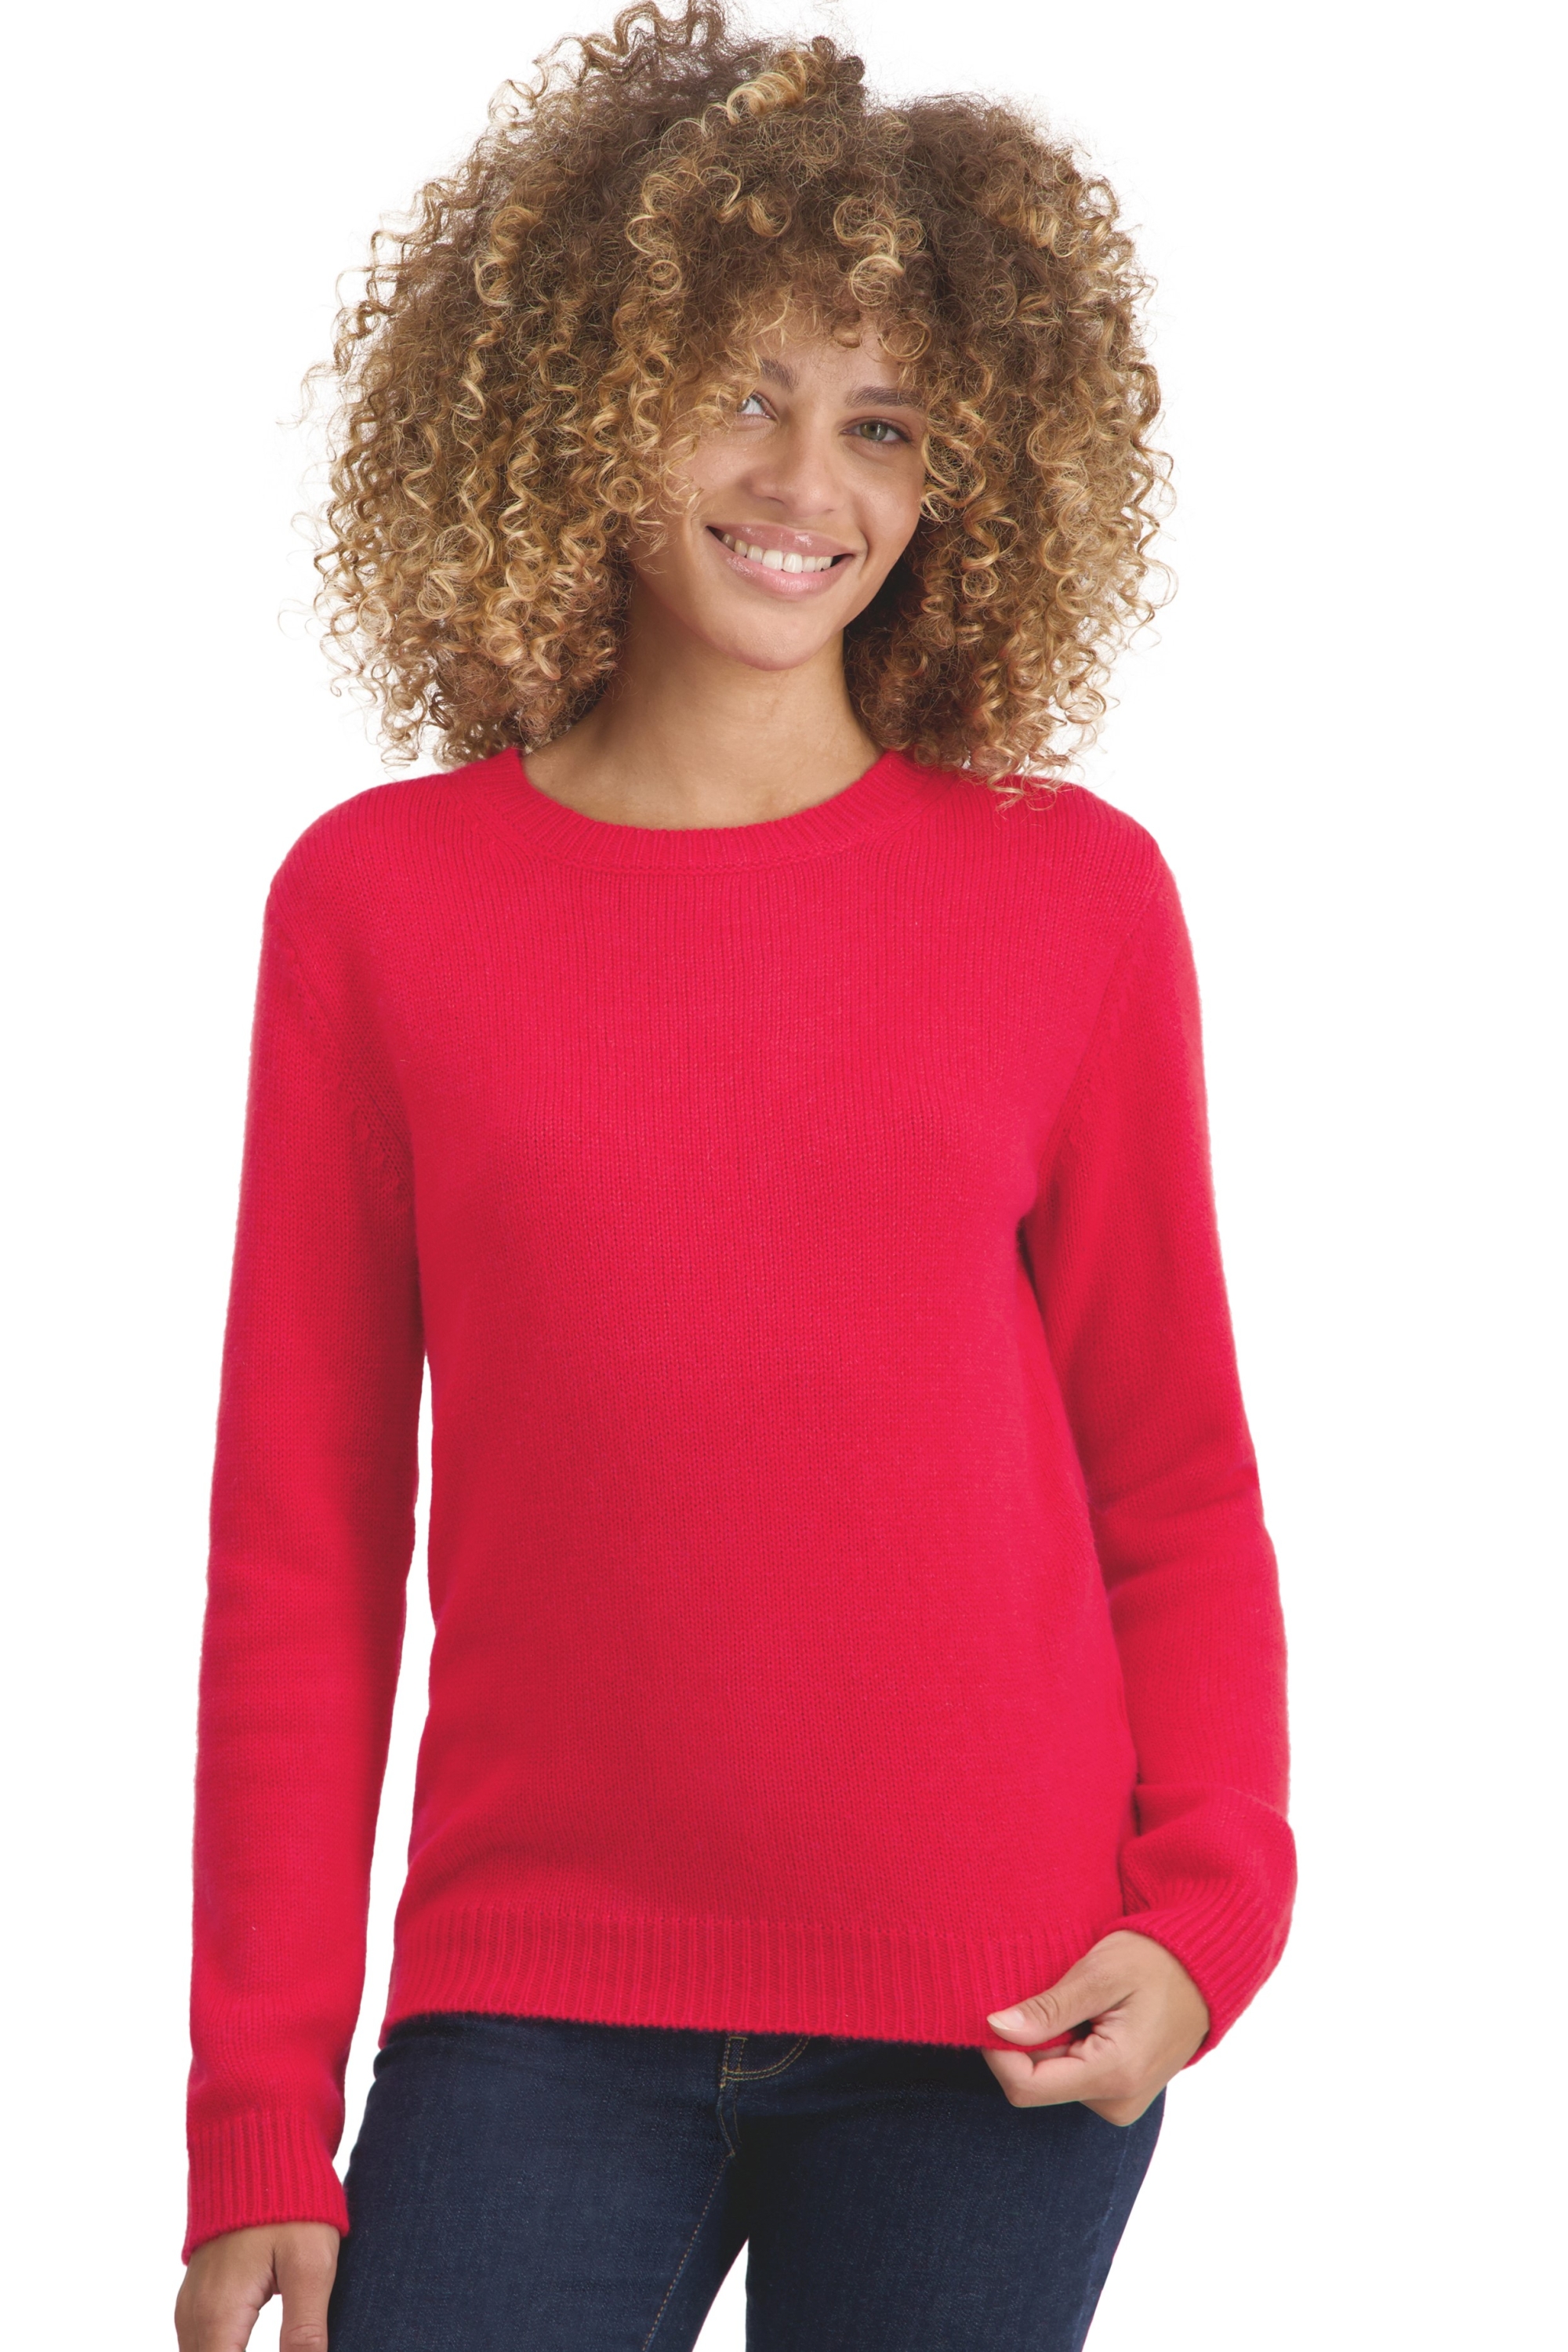 Cachemire pull femme col rond tyrol rouge 4xl